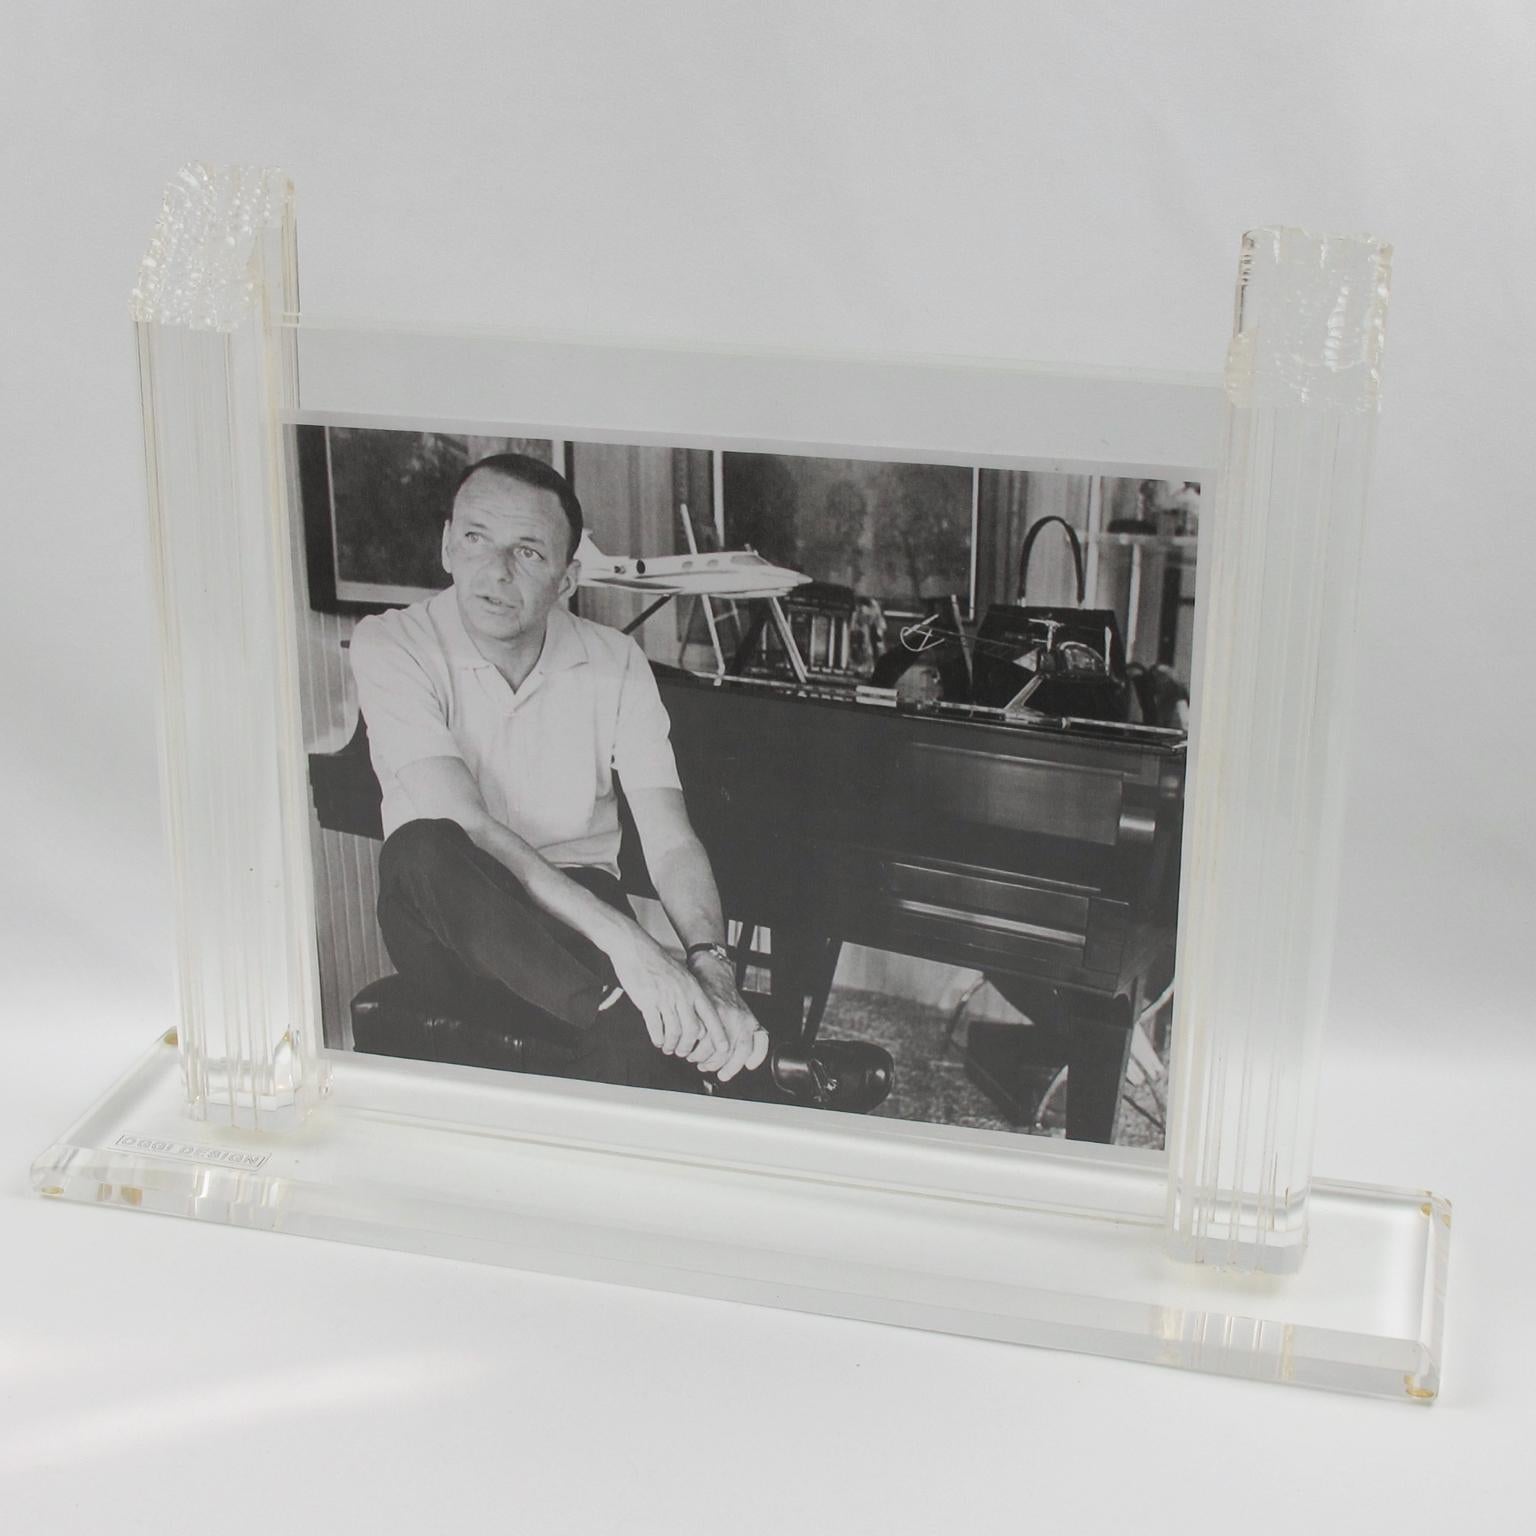 Beautiful modernist Lucite picture photo frame designed by Oggi design, Italy. Large and thick crystal clear Lucite base with beveling topped with carved pole holders finished with an unusual rough carving on top. Two sheets of acrylic to hold the